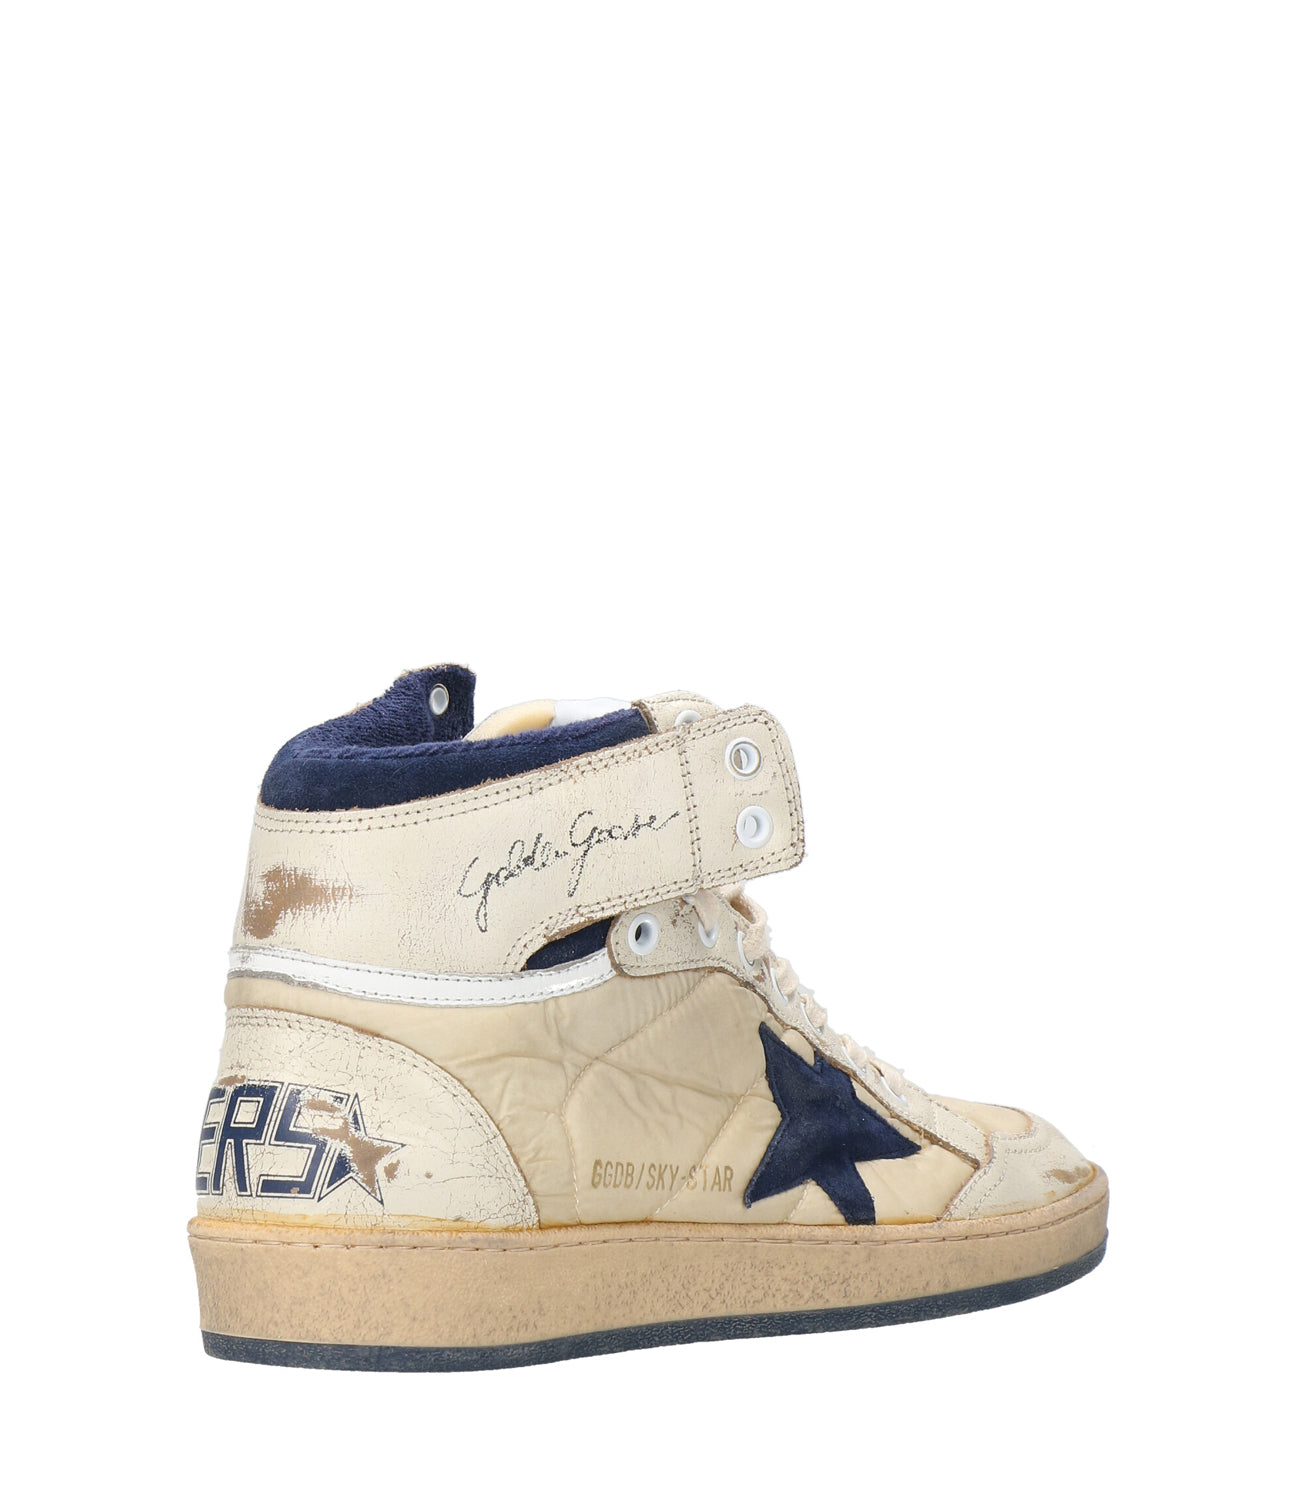 Golden Goose | Sky-Star Sneakers White and Blue